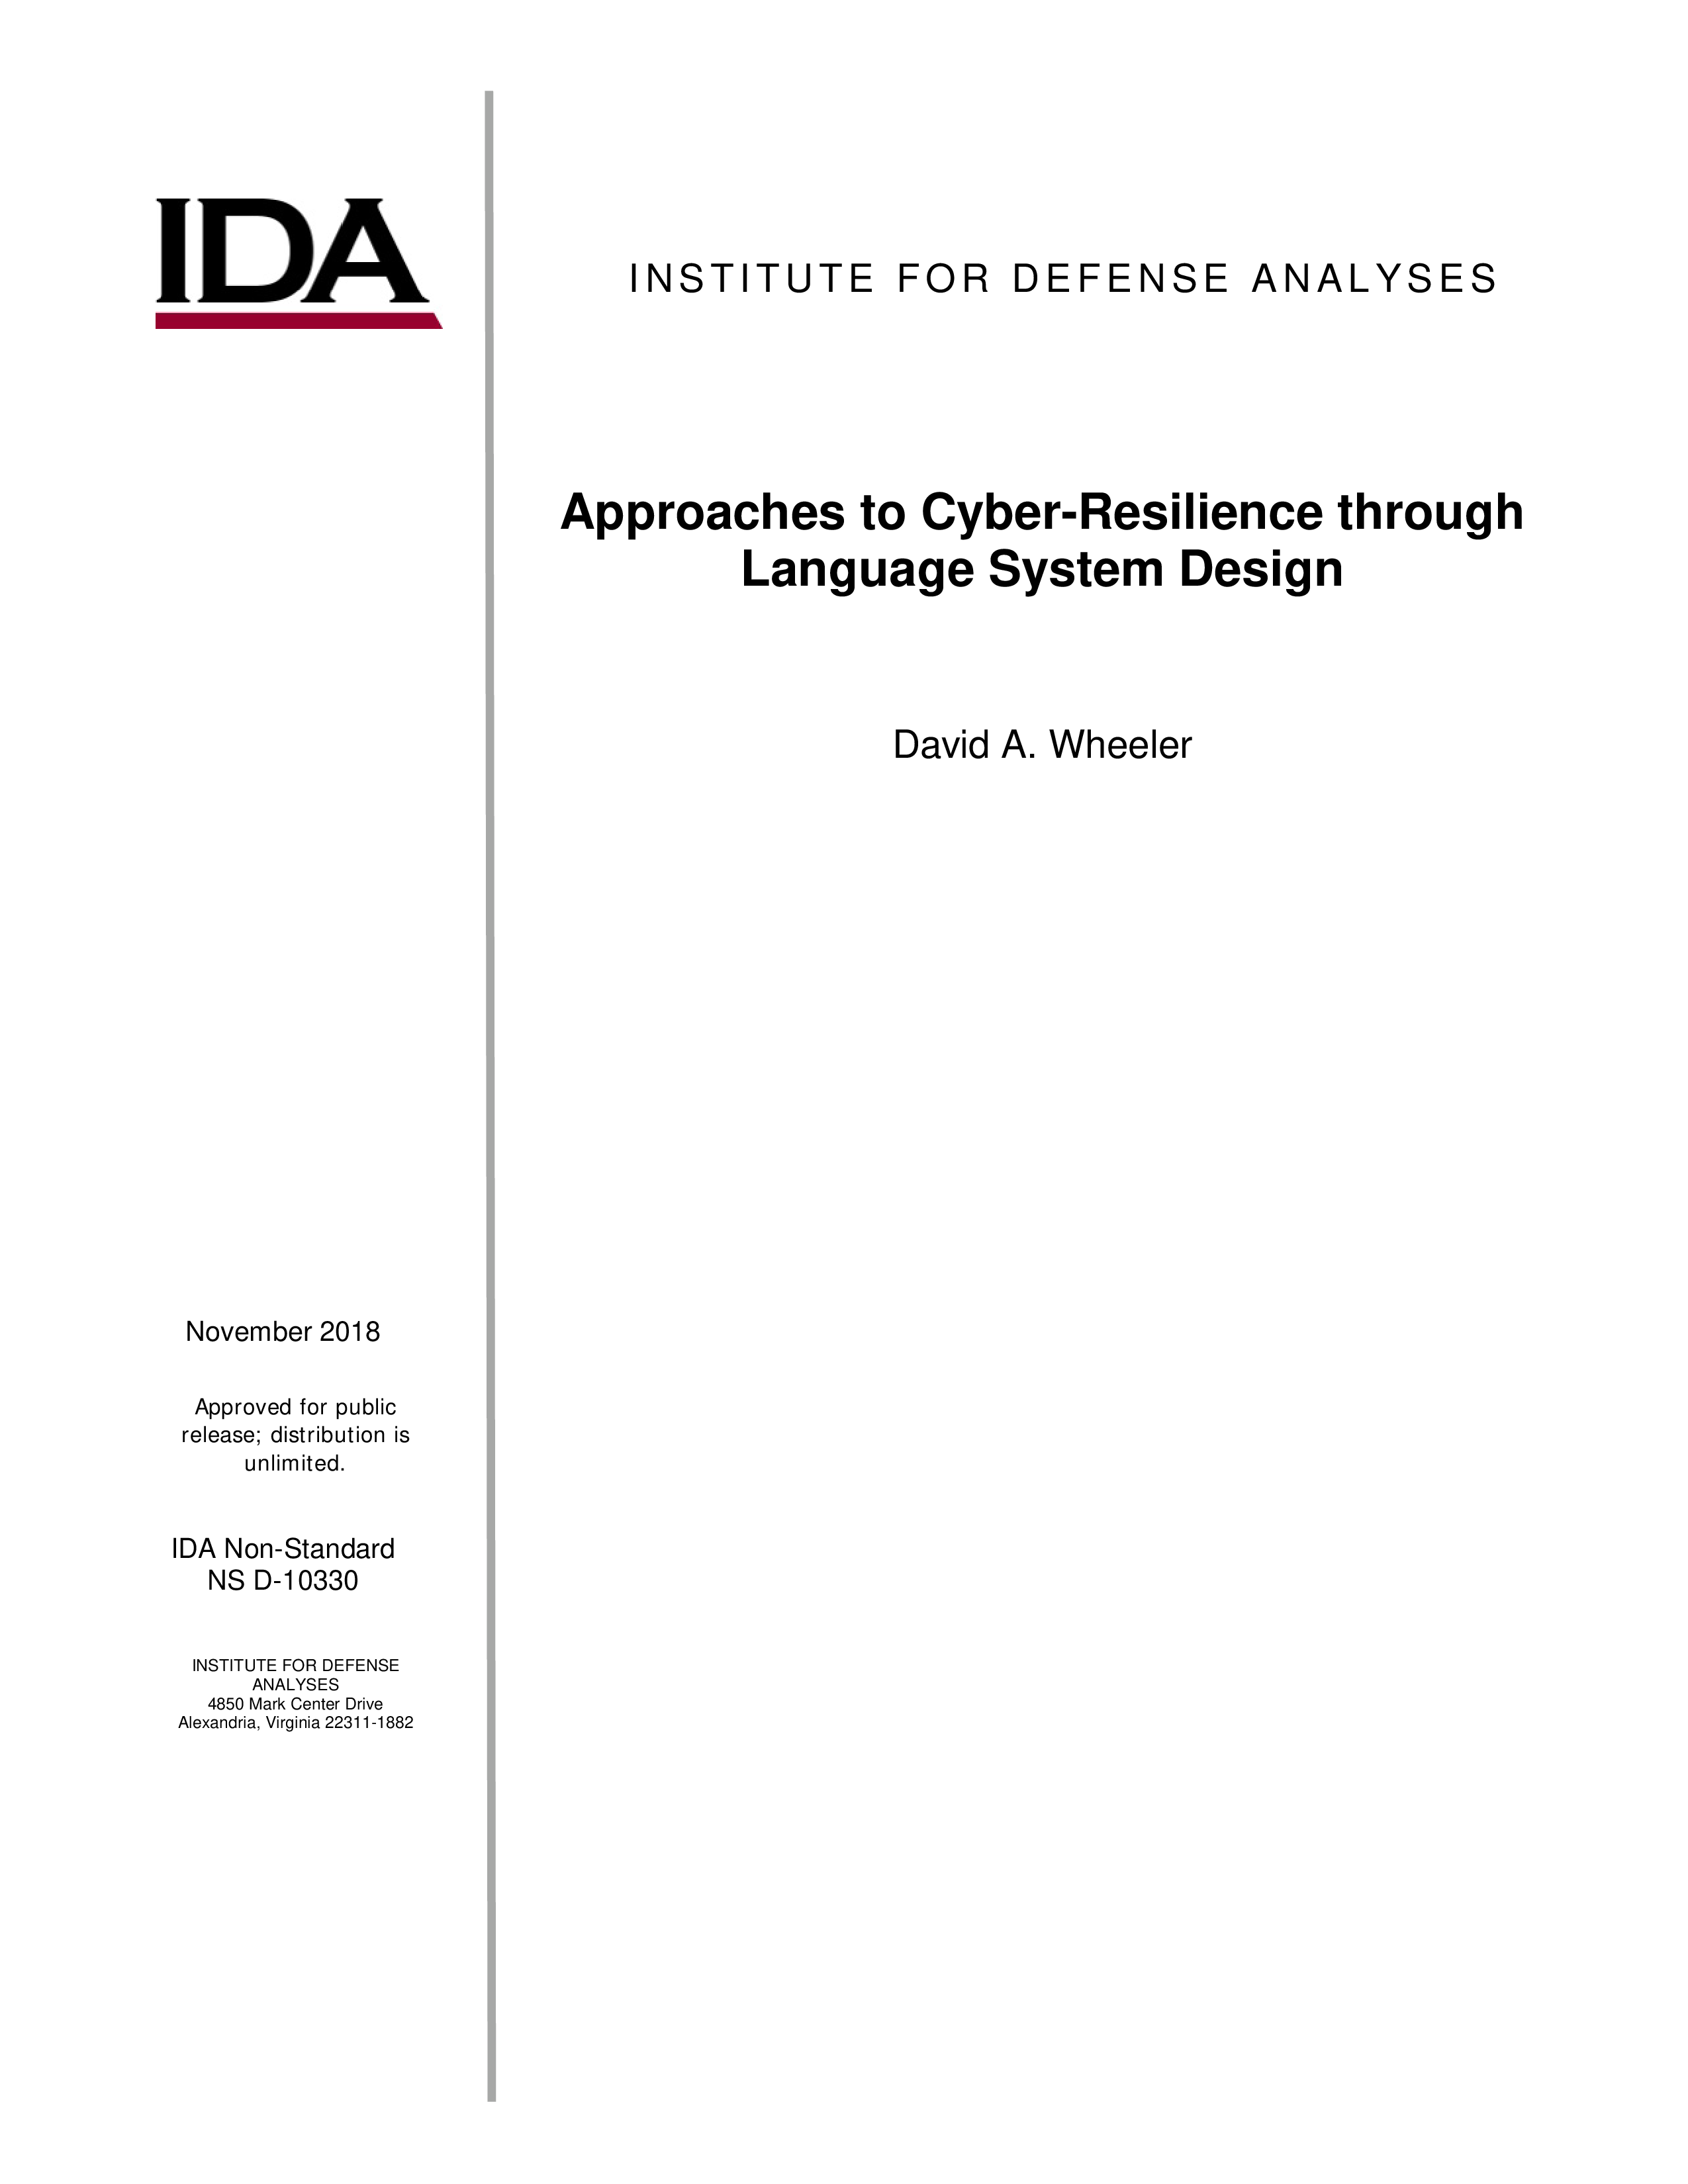 Approaches to Cyber-Resilience through Language System Design